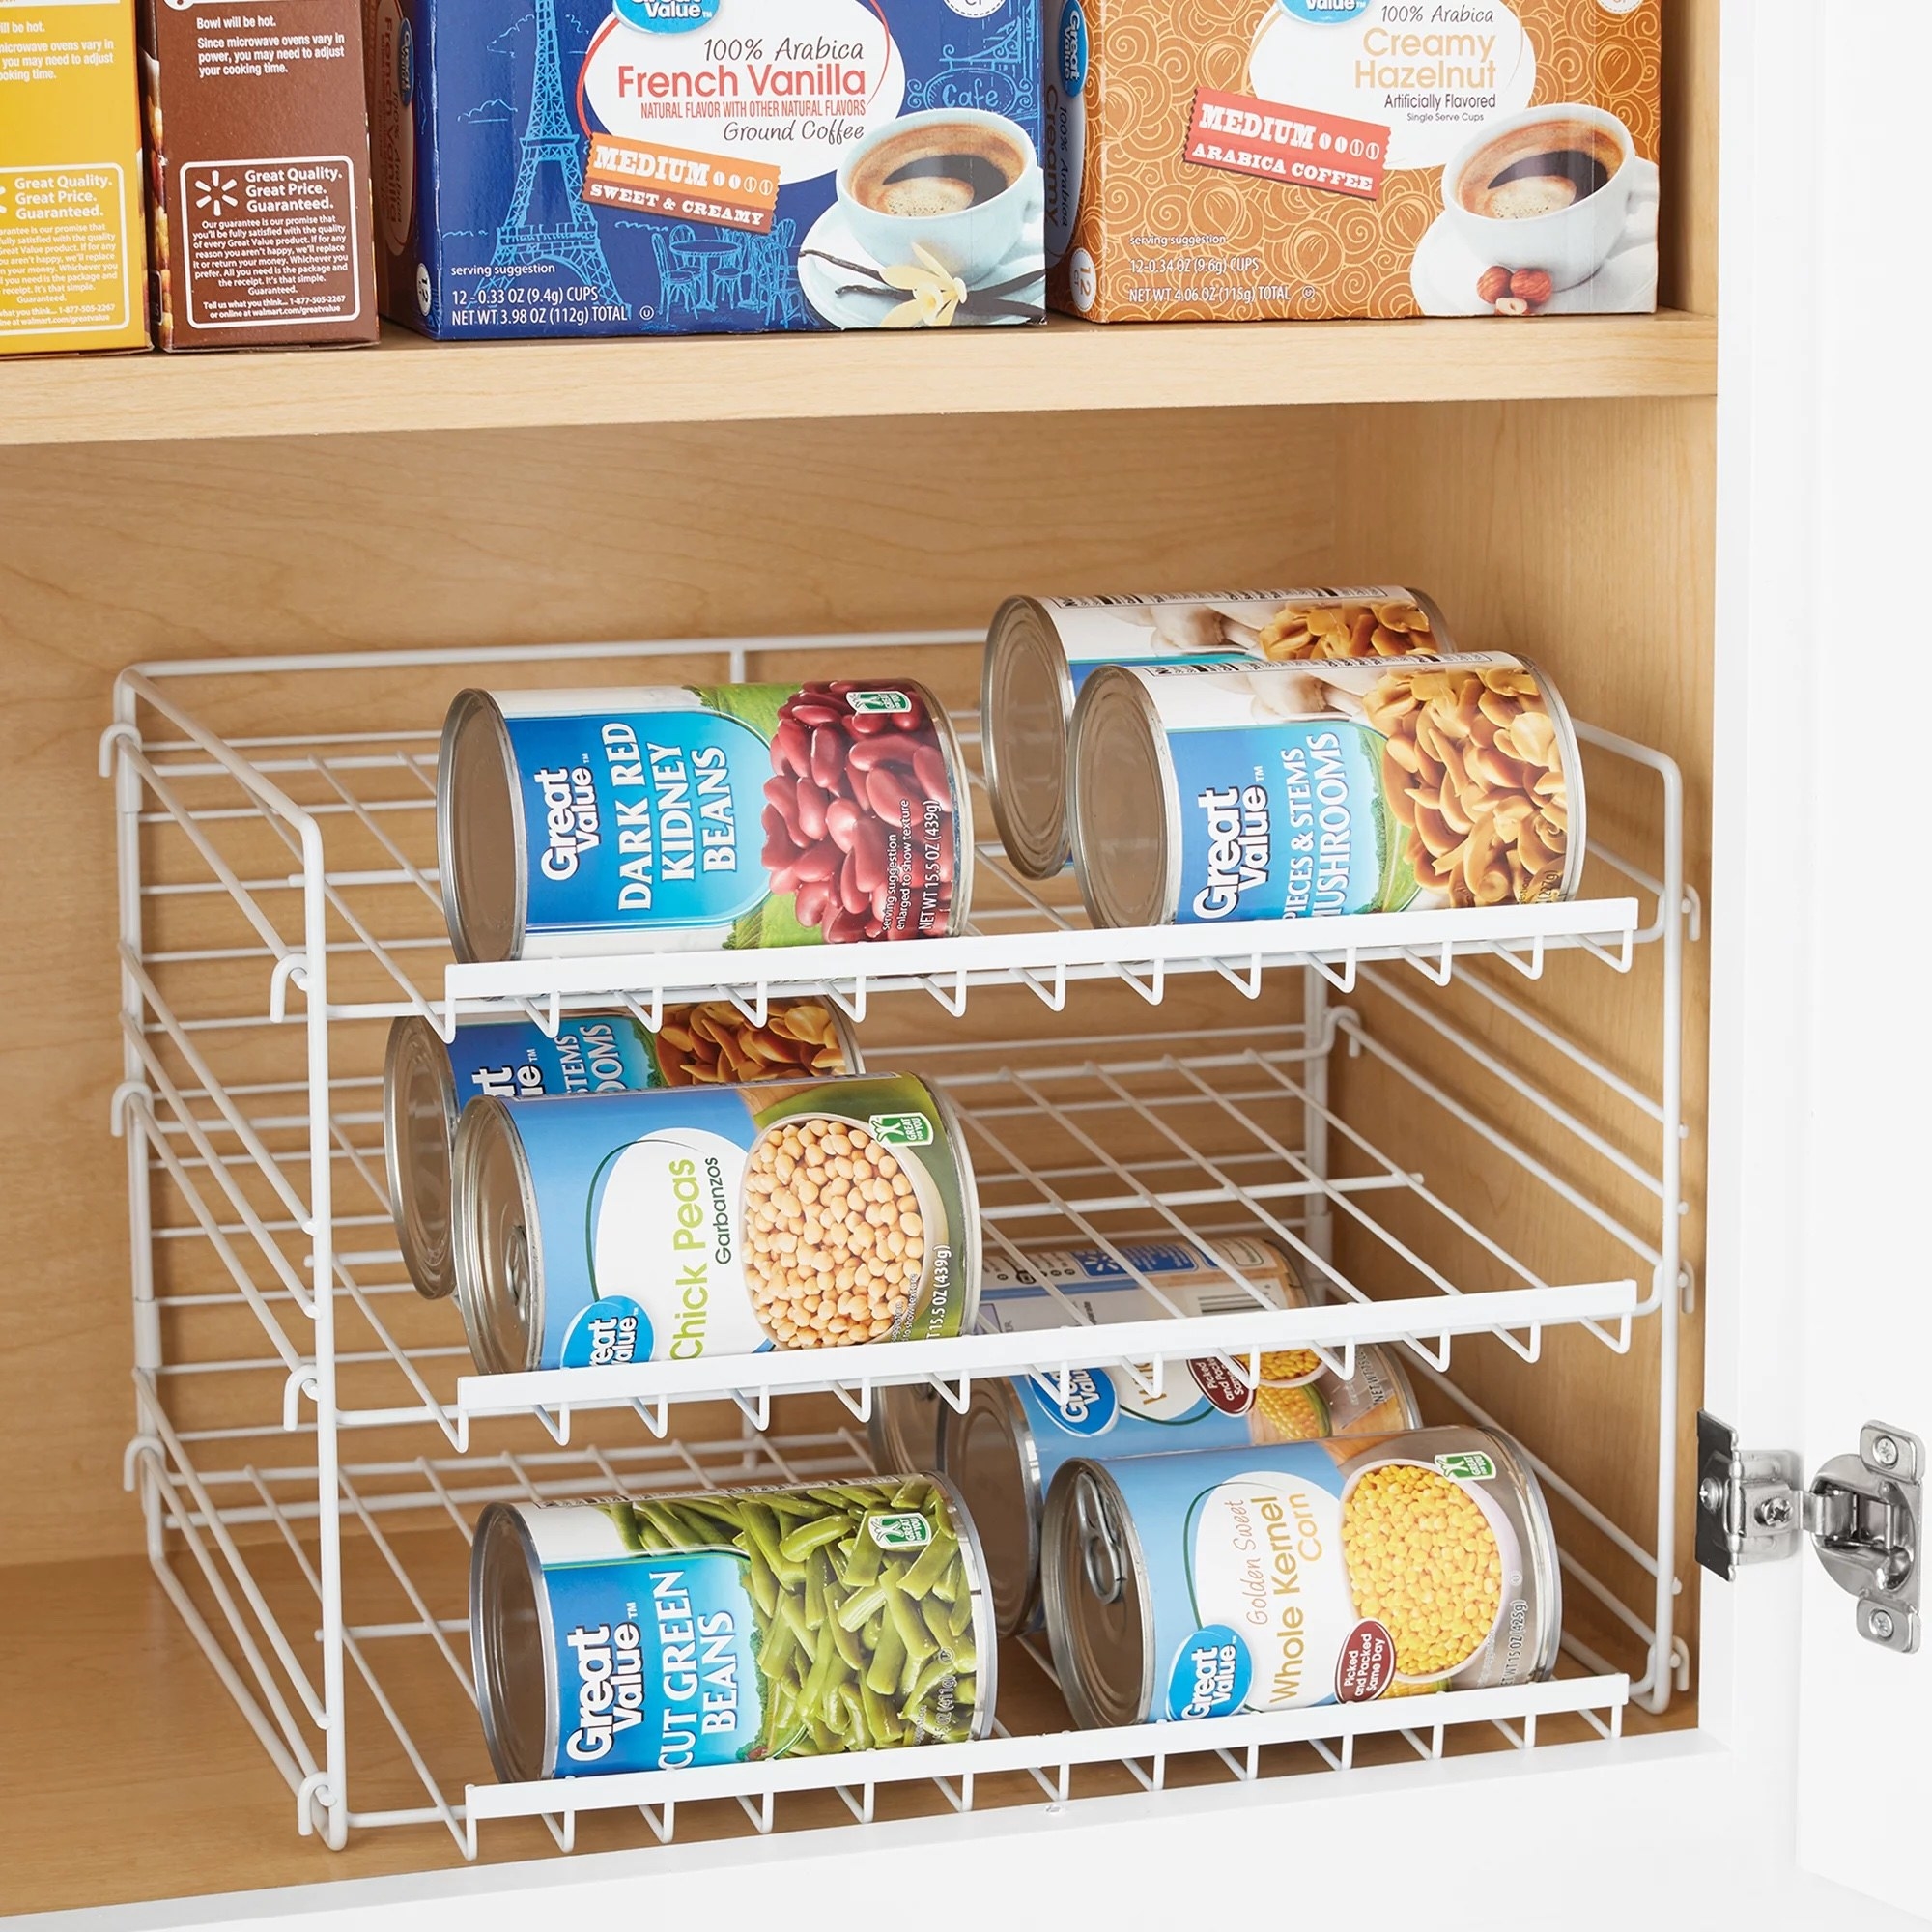 a white three-tier organizer rack holding canned goods